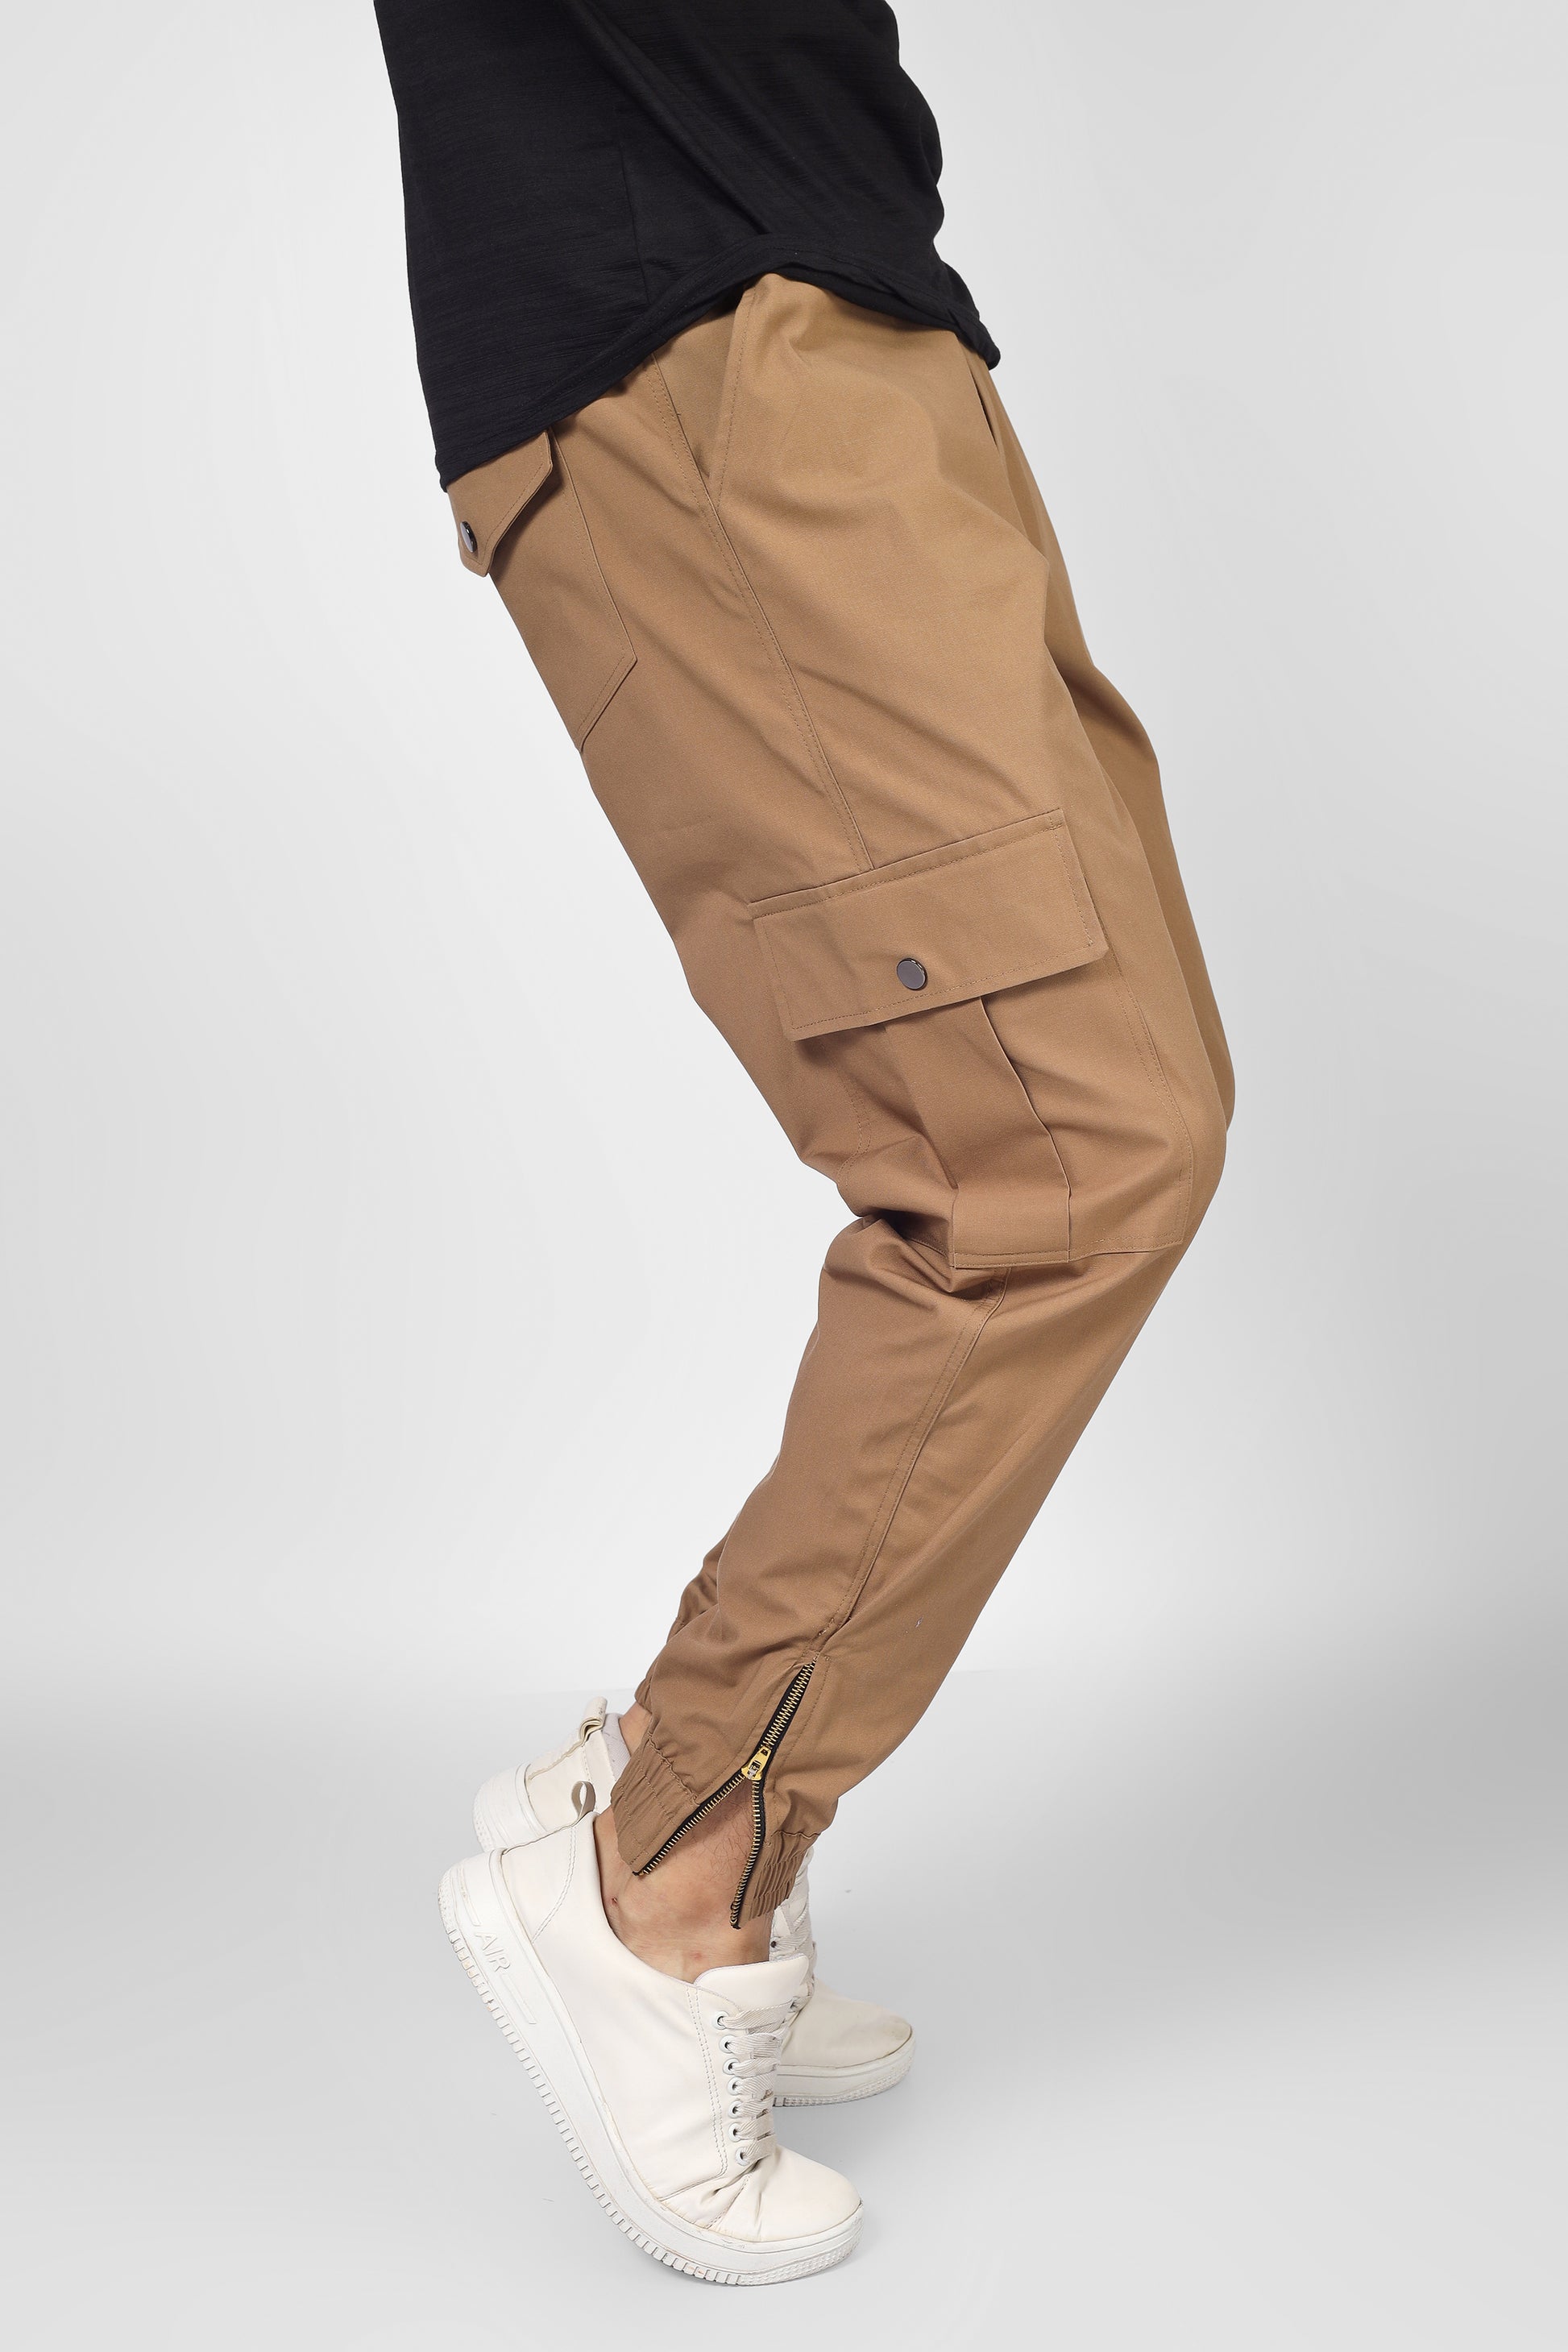 Stylish and Functional 6-Pocket Cargo Pants in Black